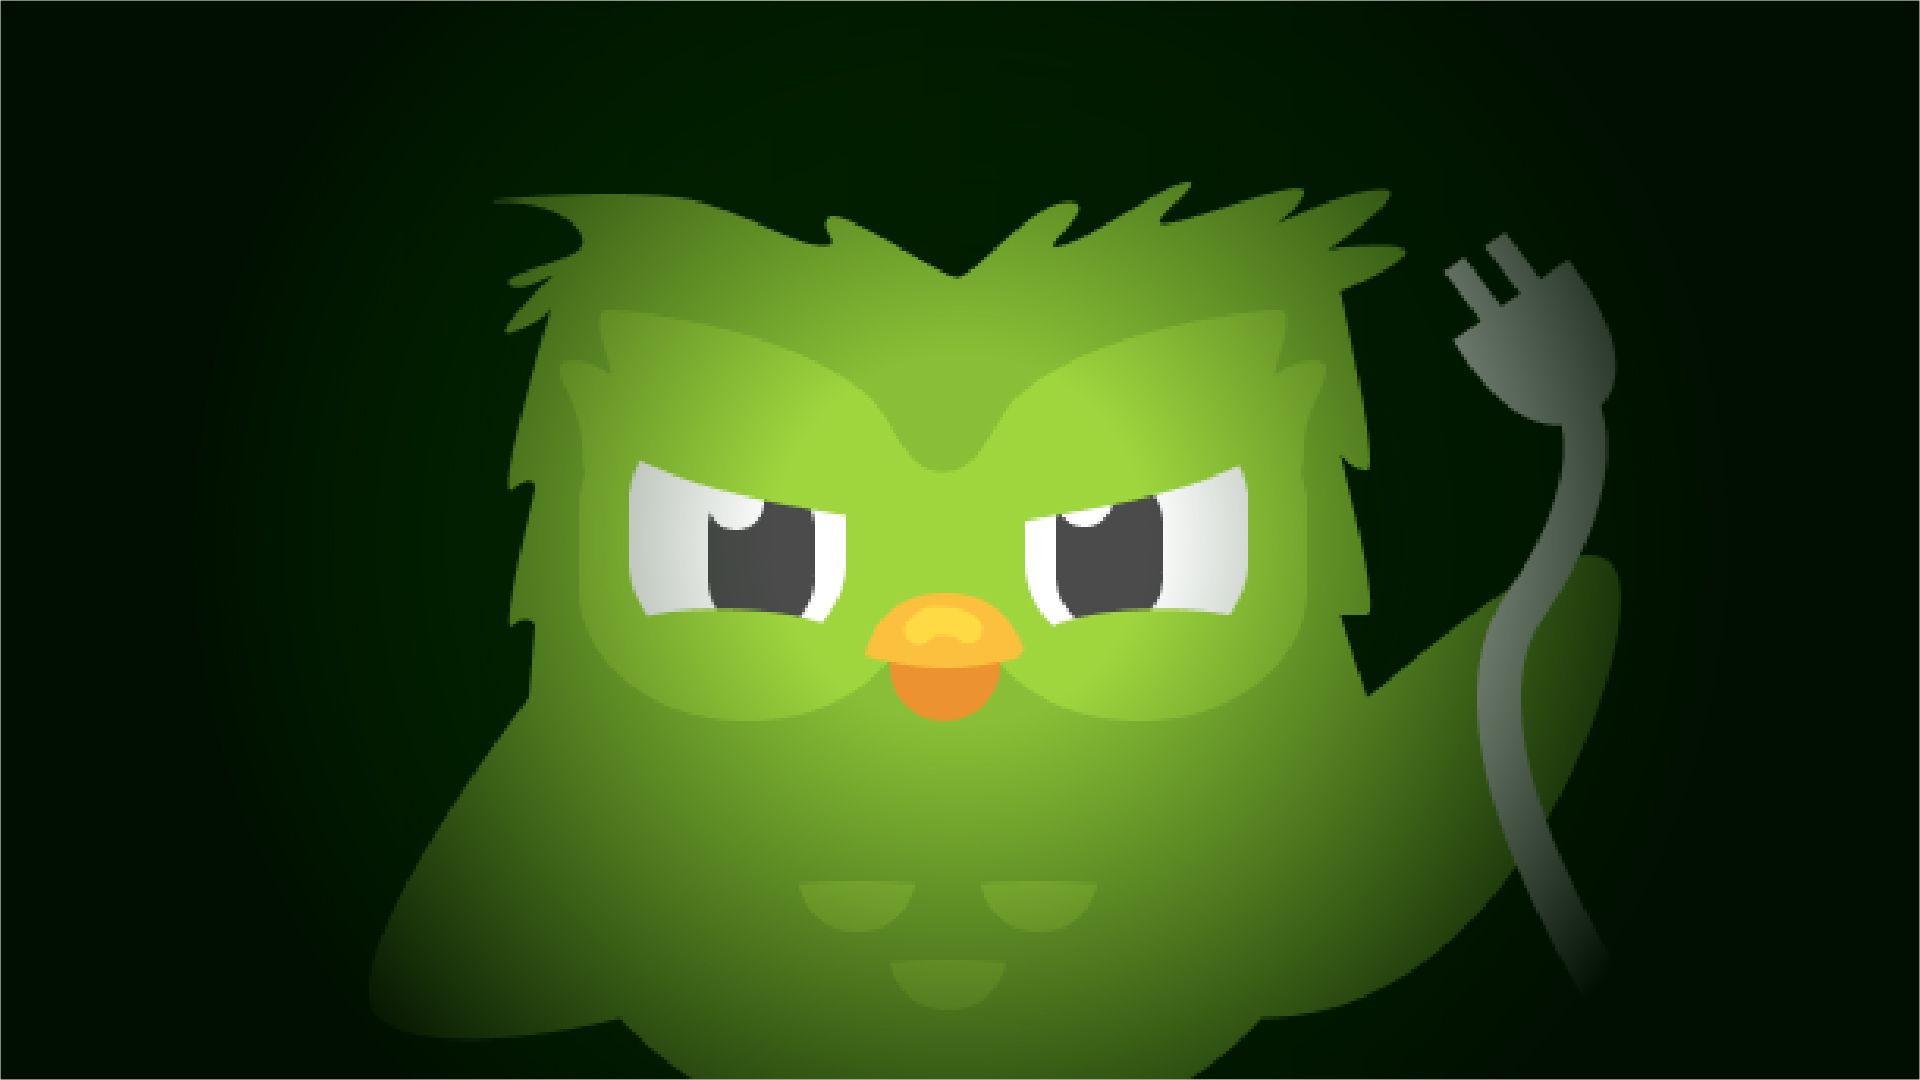 A cropped illustration of Duolingo’s mascot, a green owl named, “Duo,” peering at the viewer.